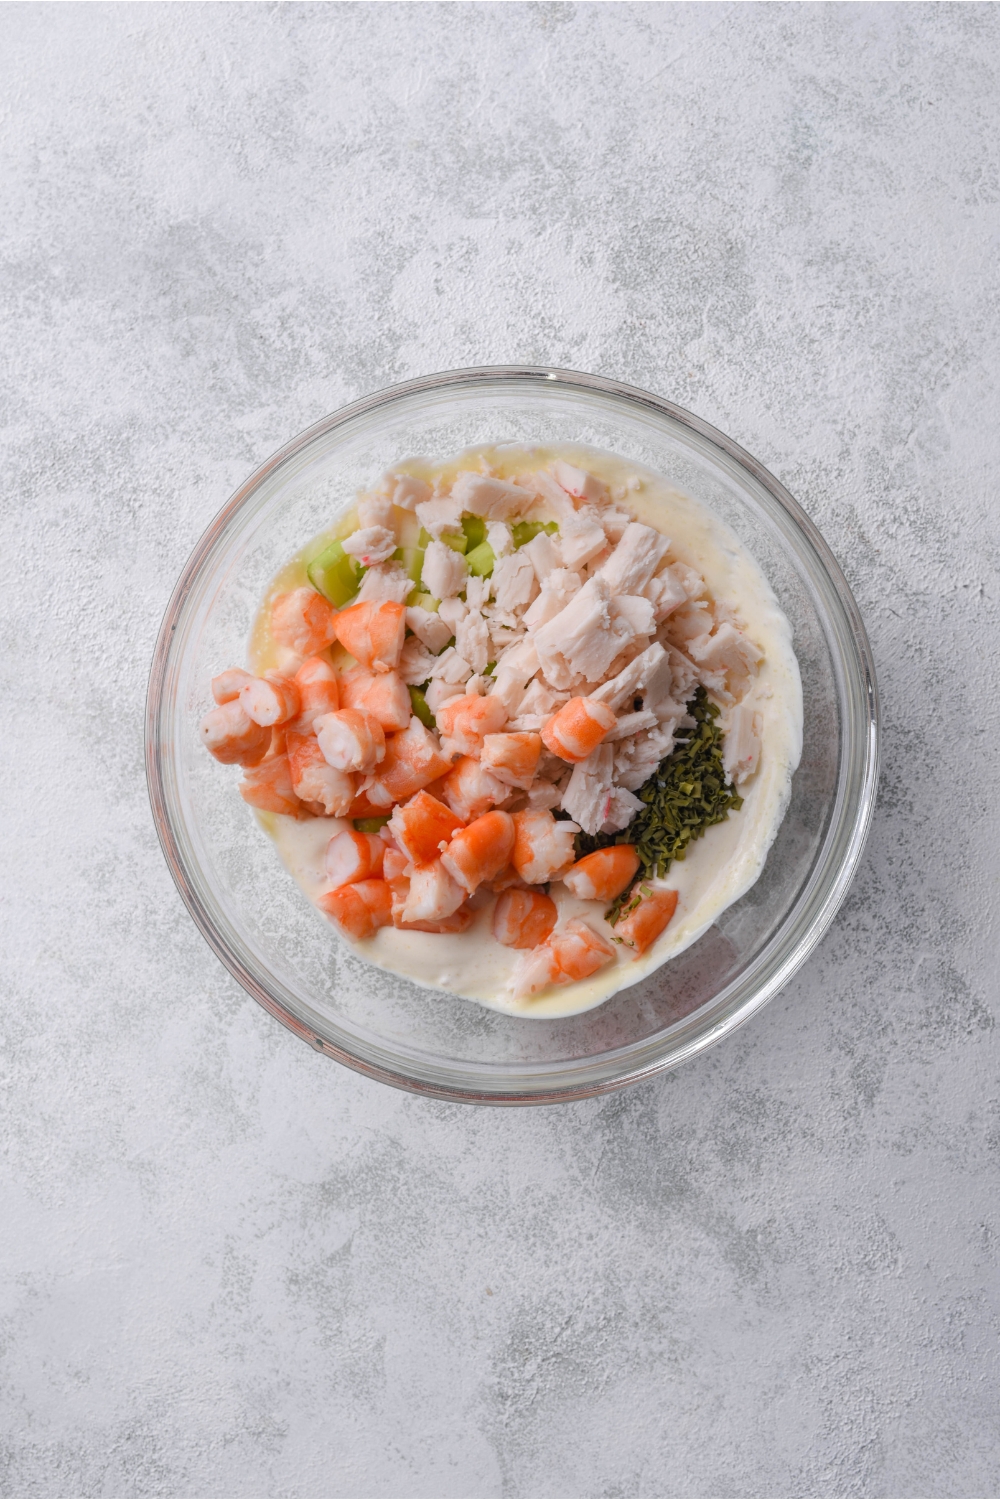 A clear bowl filled with crab meat, shrimp chunks, diced celery, and herbs in a creamy dressing.